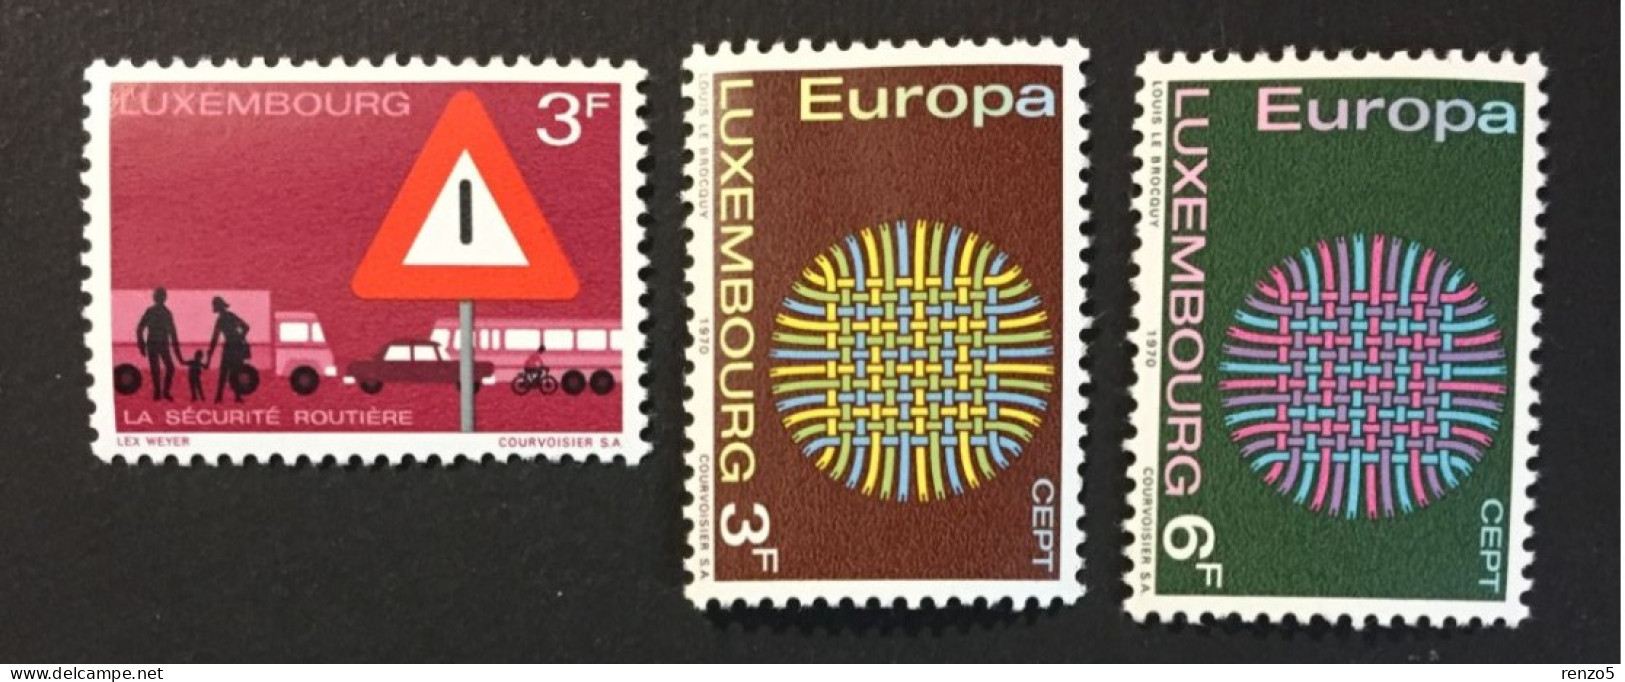 1970 Luxembourg -The Importance Of Traffic Safety, Europa CEPT - Unused - Neufs